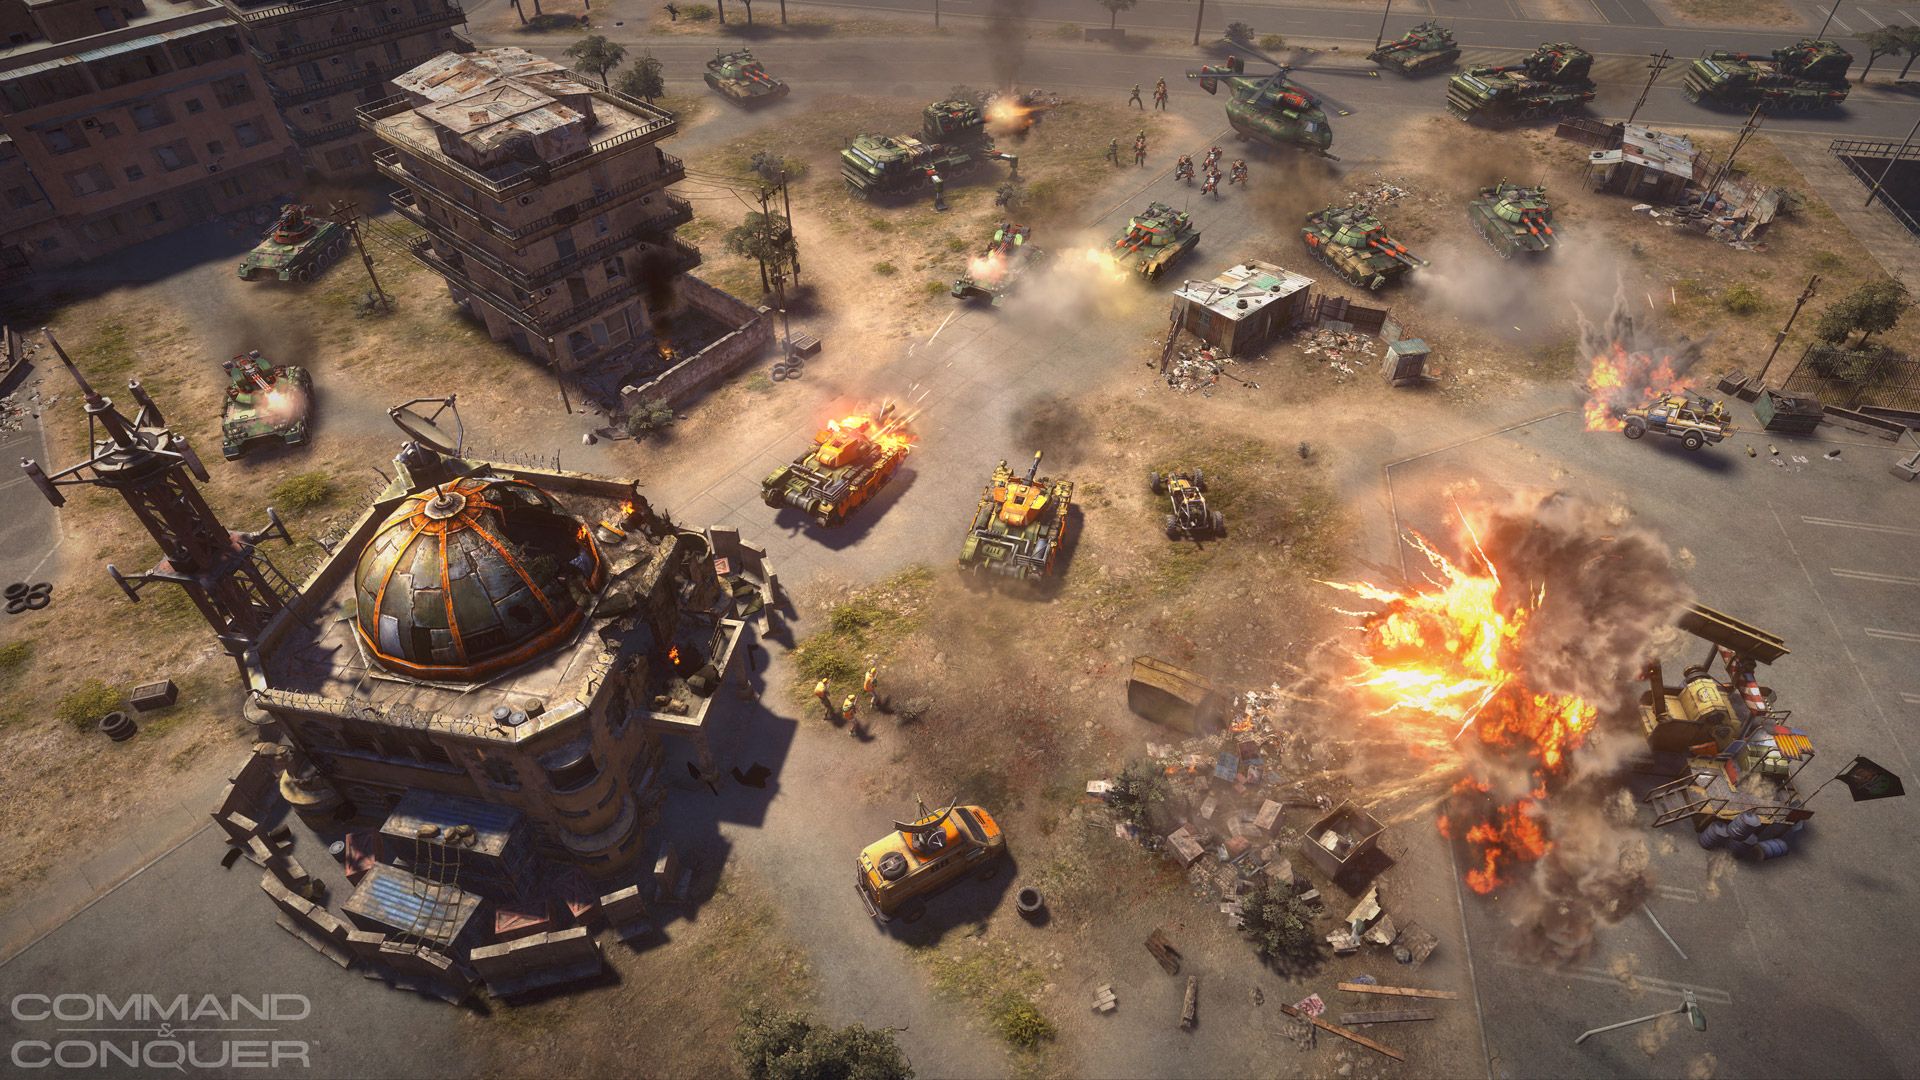 Free Download Command And Conquer Wallpaper 11jpg 1920x1080 For Images, Photos, Reviews